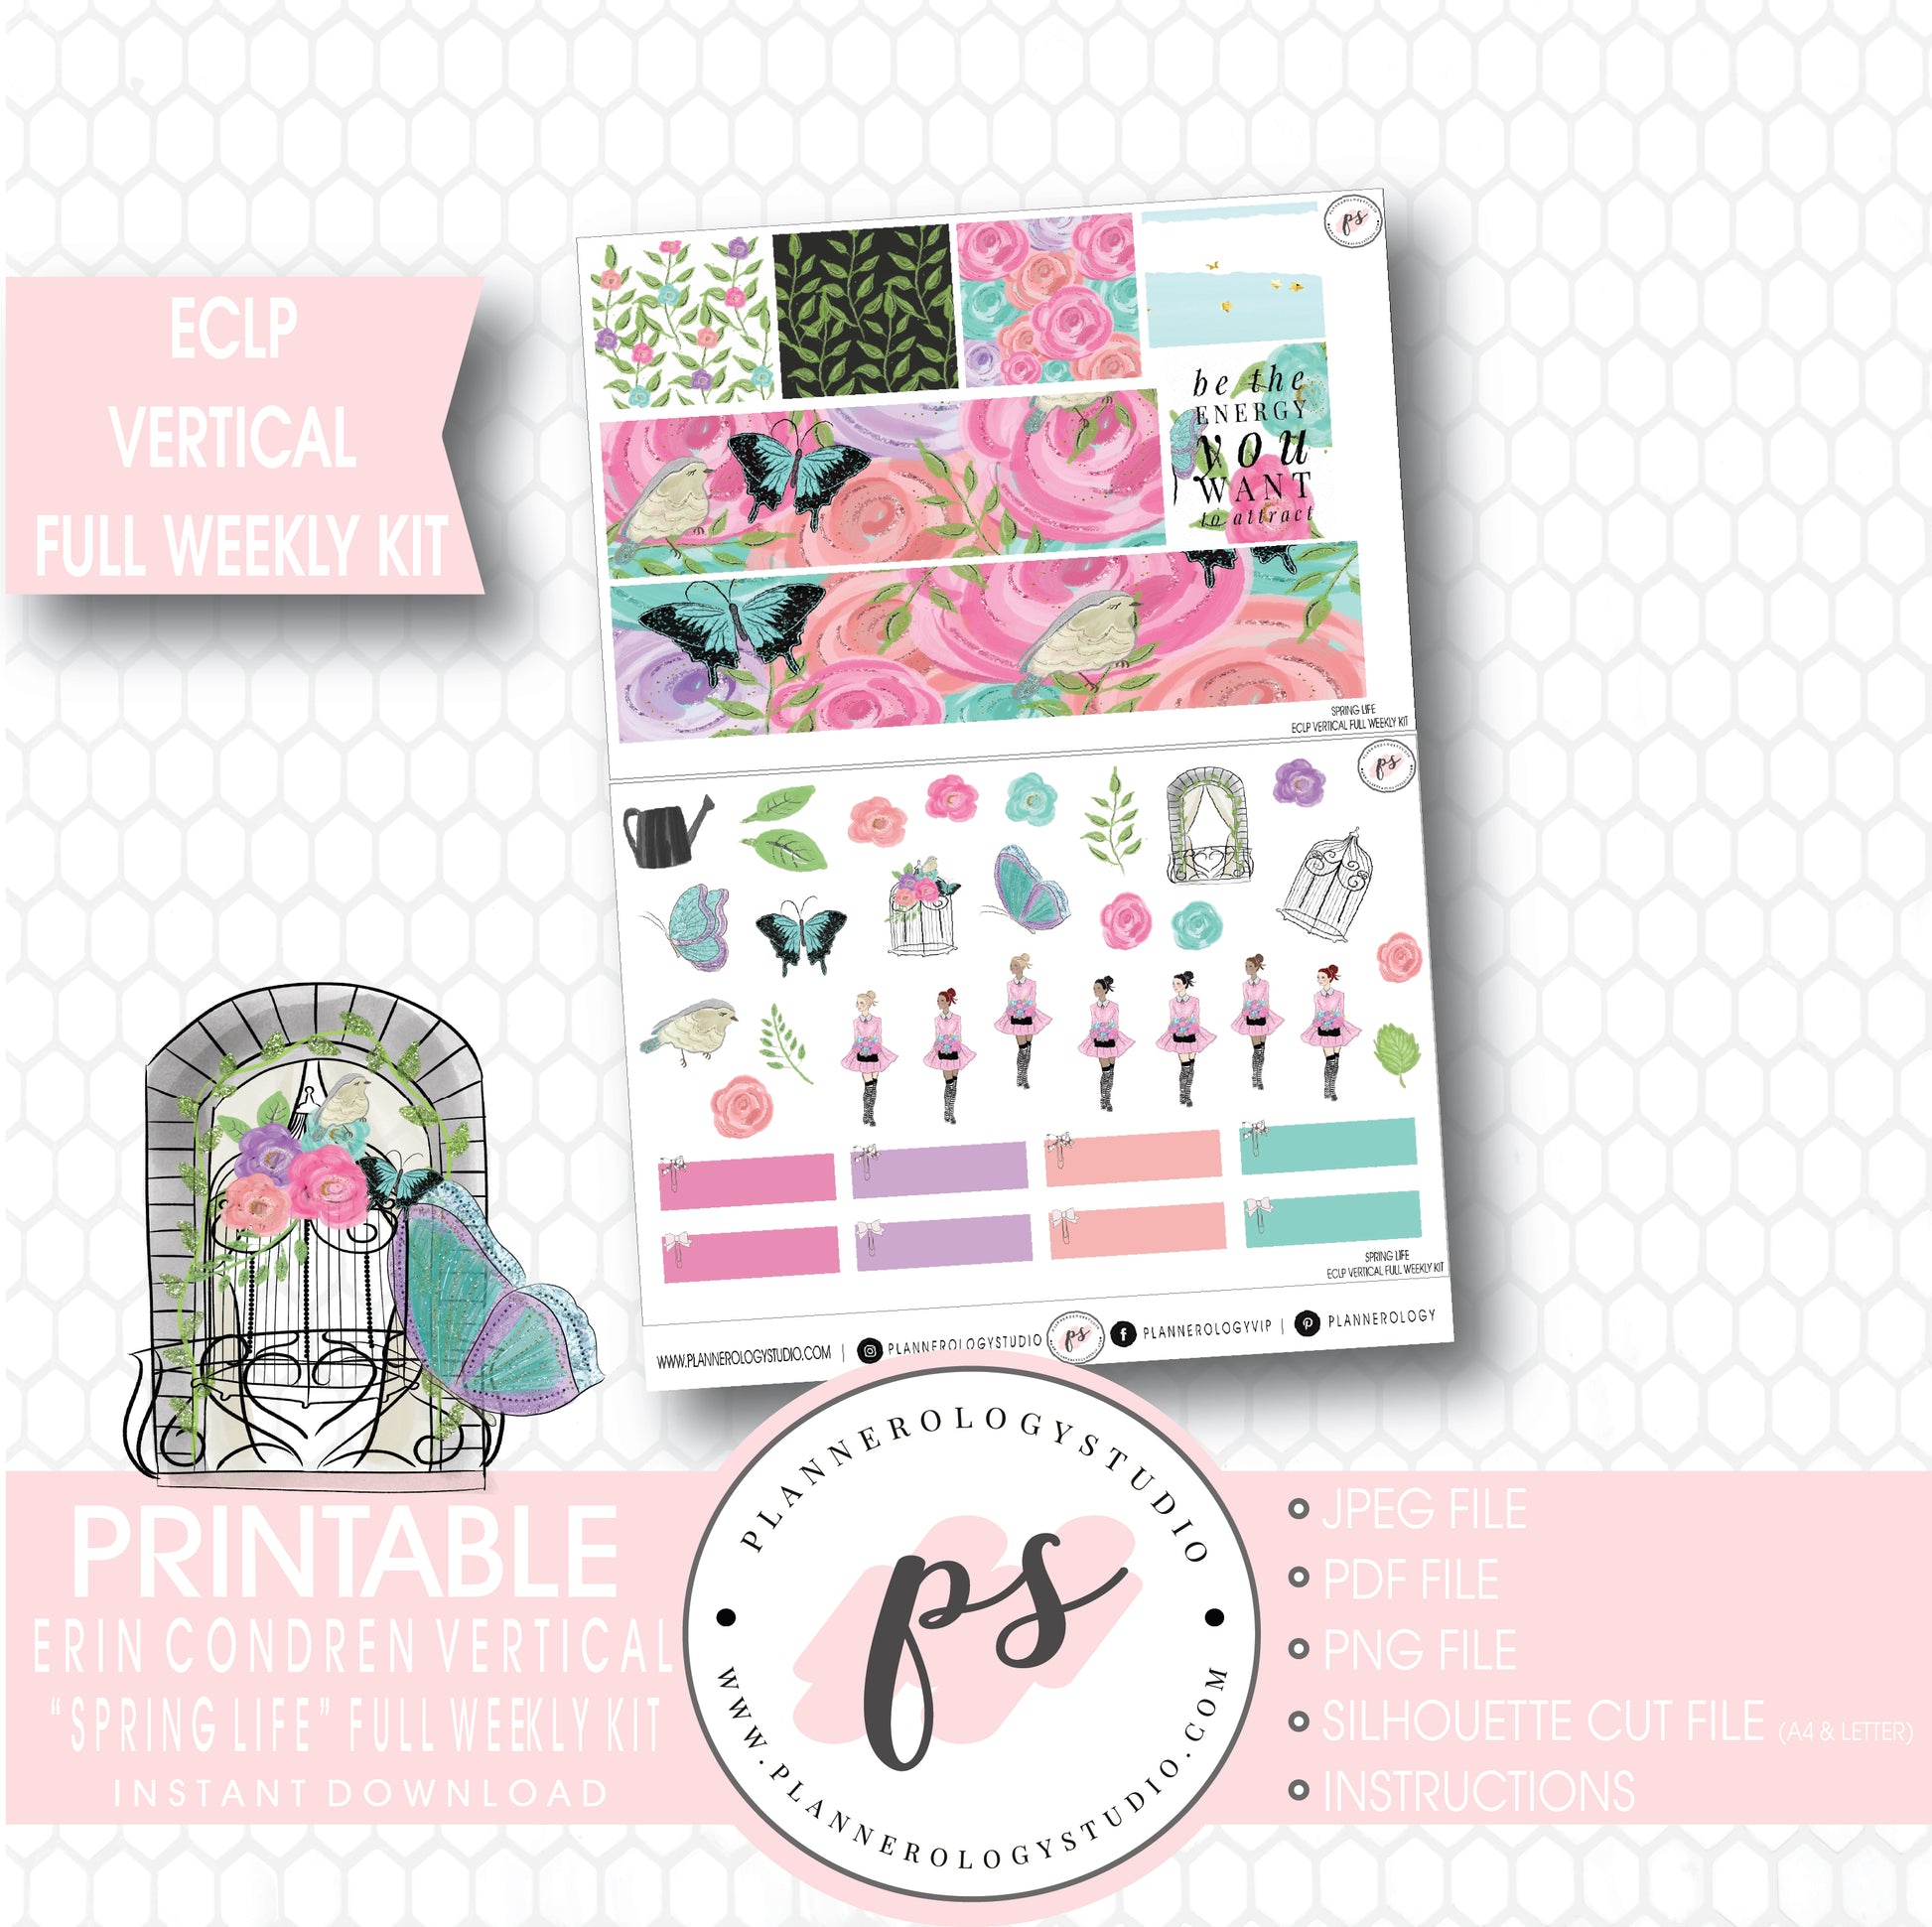 Spring Life Full Weekly Kit Printable Planner Stickers (for use with ECLP Vertical) - Plannerologystudio